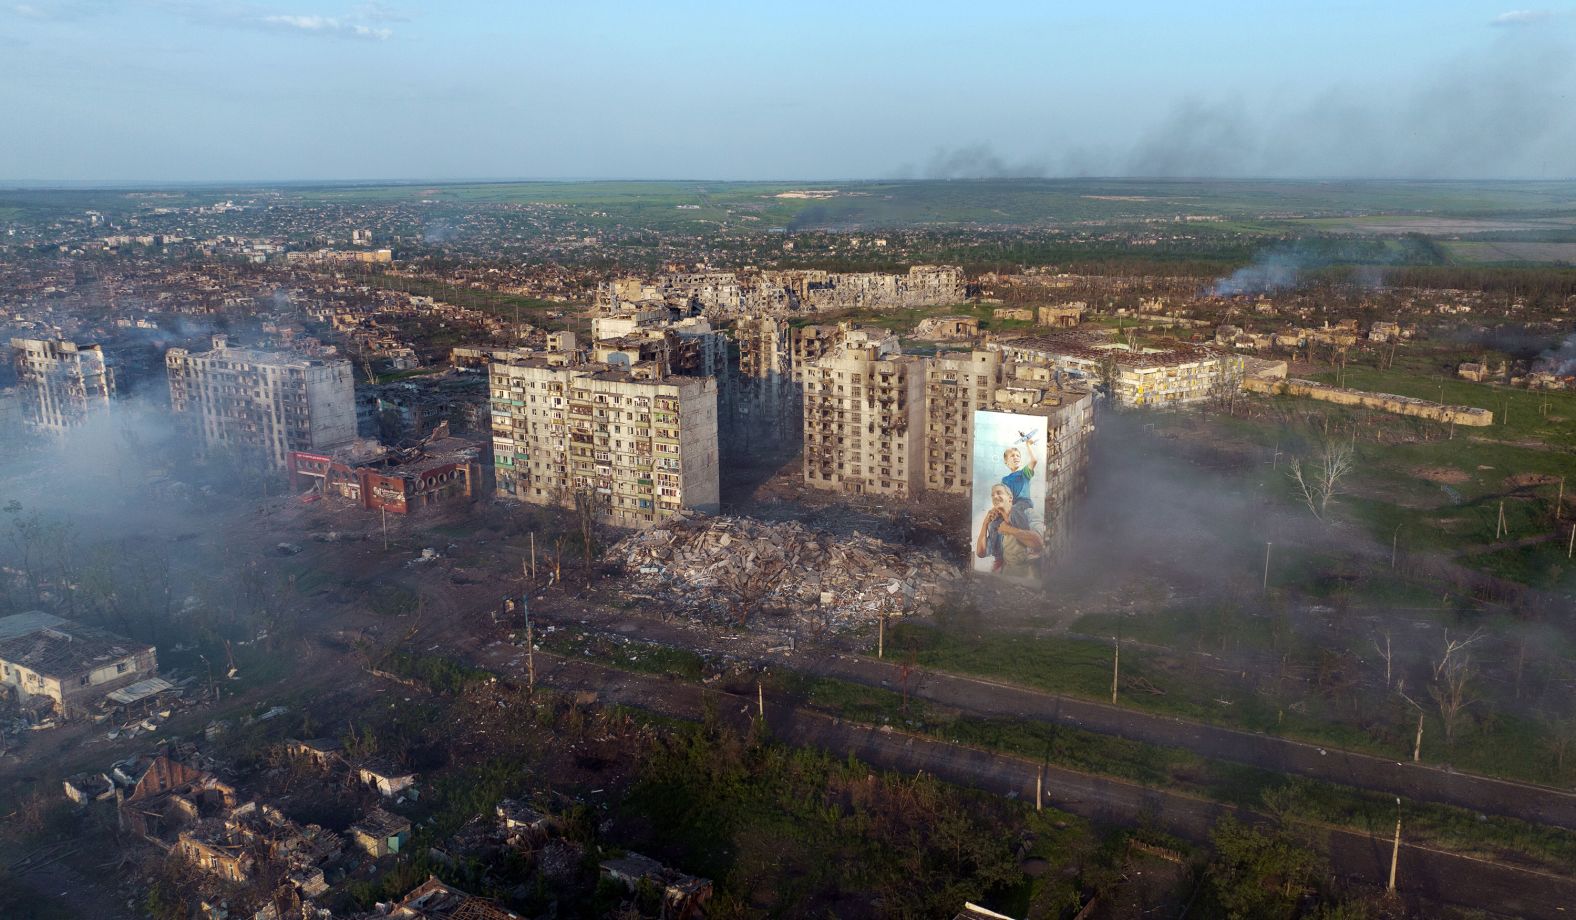 Damage is seen in Bakhmut, Ukraine, on Friday, May 19. Russia has thrown <a href="index.php?page=&url=https%3A%2F%2Fwww.cnn.com%2F2023%2F05%2F20%2Feurope%2Fbakhmut-capture-wagner-ukraine-russia-intl%2Findex.html" target="_blank">huge amounts of manpower, weaponry and attention</a> toward capturing the city.